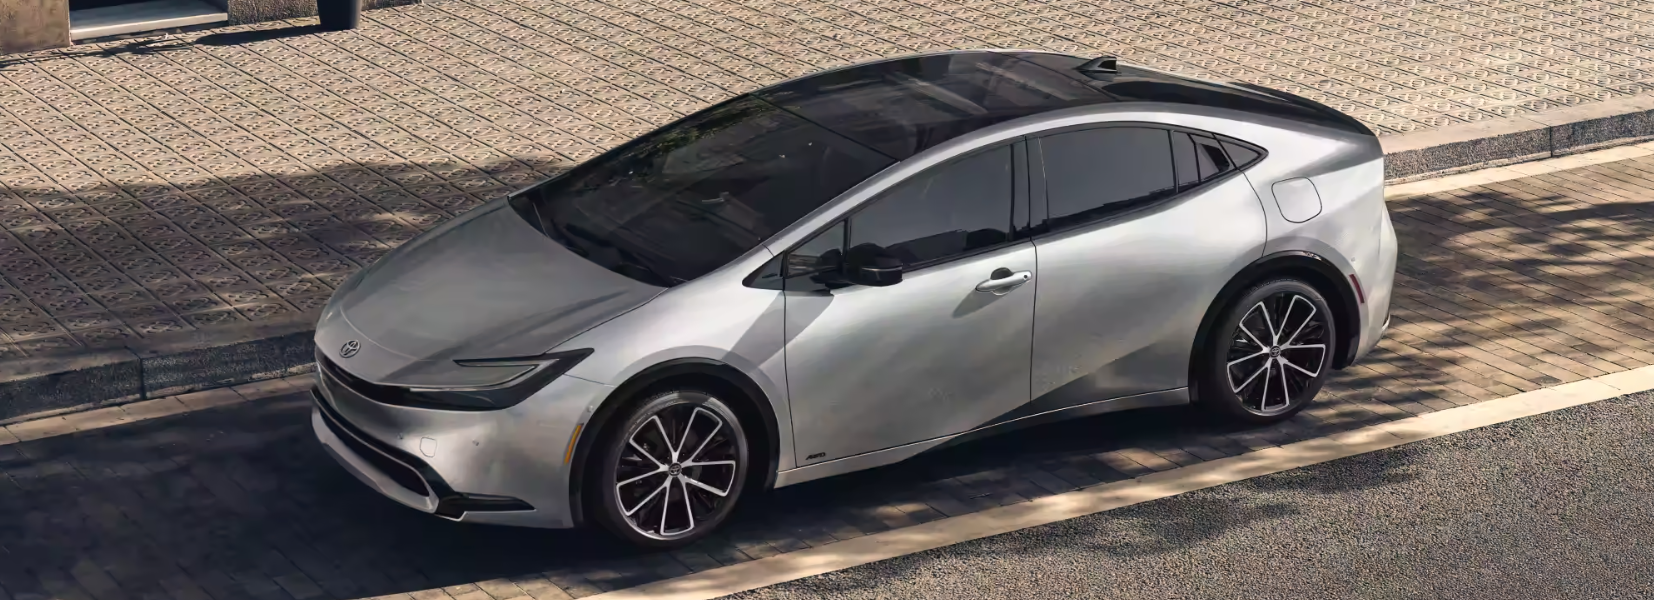 2023 Toyota Prius for Sale near Des Moines, IA - Toyota of Des Moines